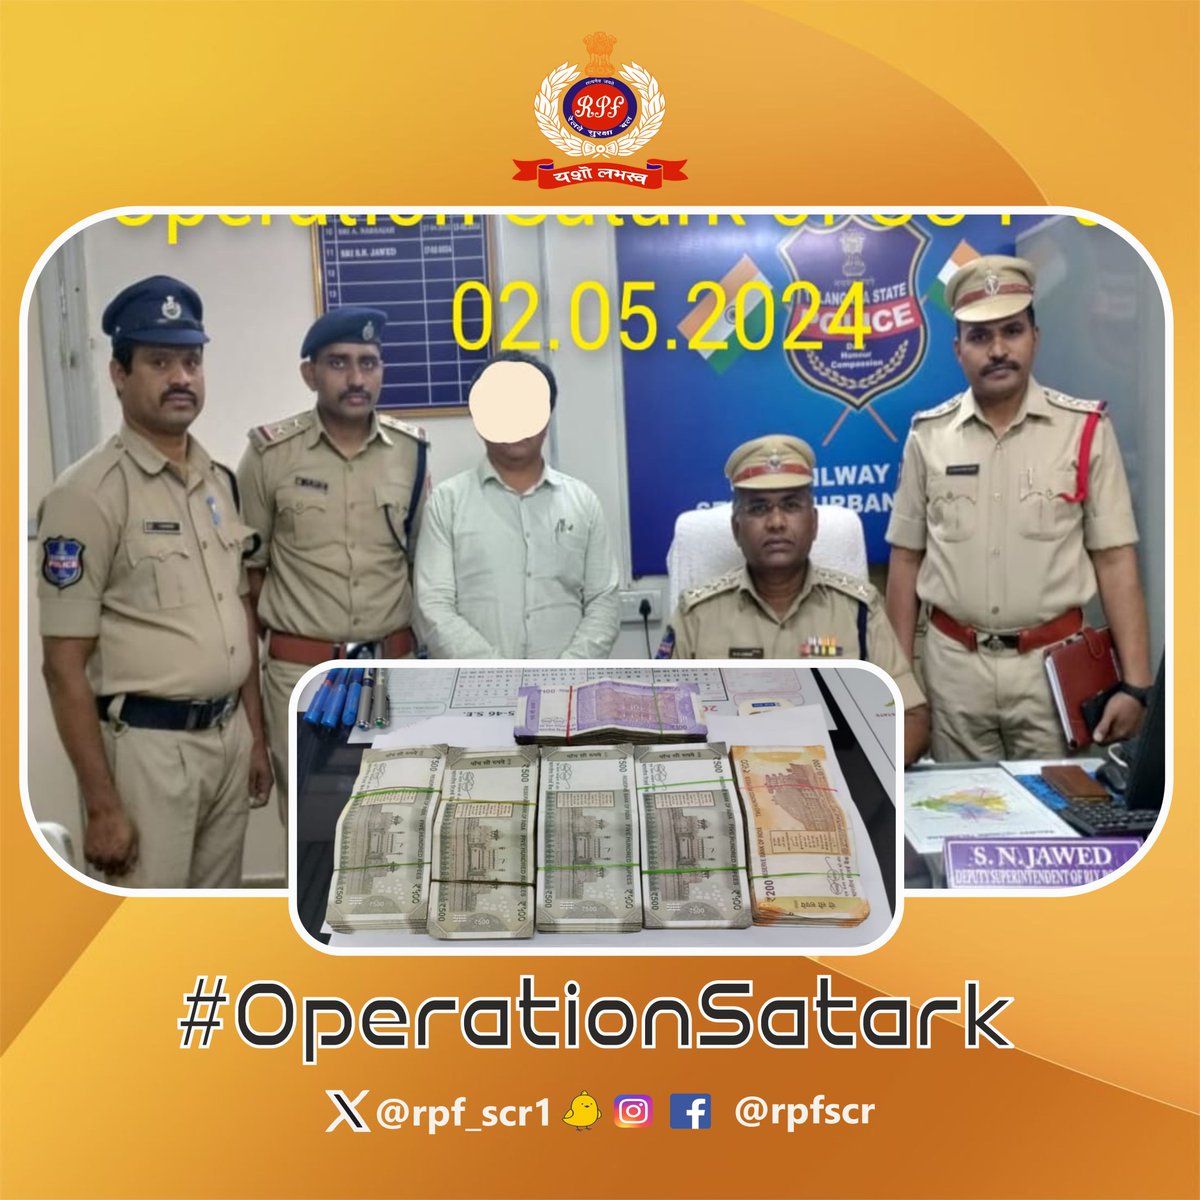 Securing our society, #RPF & #GRP #Secunderabad, made a vital catch at #Secunderabad Station. Seizing 2.30 lakh cash from an individual lacking valid documentation. #OperationSatark @RPF_INDIA @rpfscr_sc @RailMinIndia @SCRailwayIndia @IInspectorrpfsc